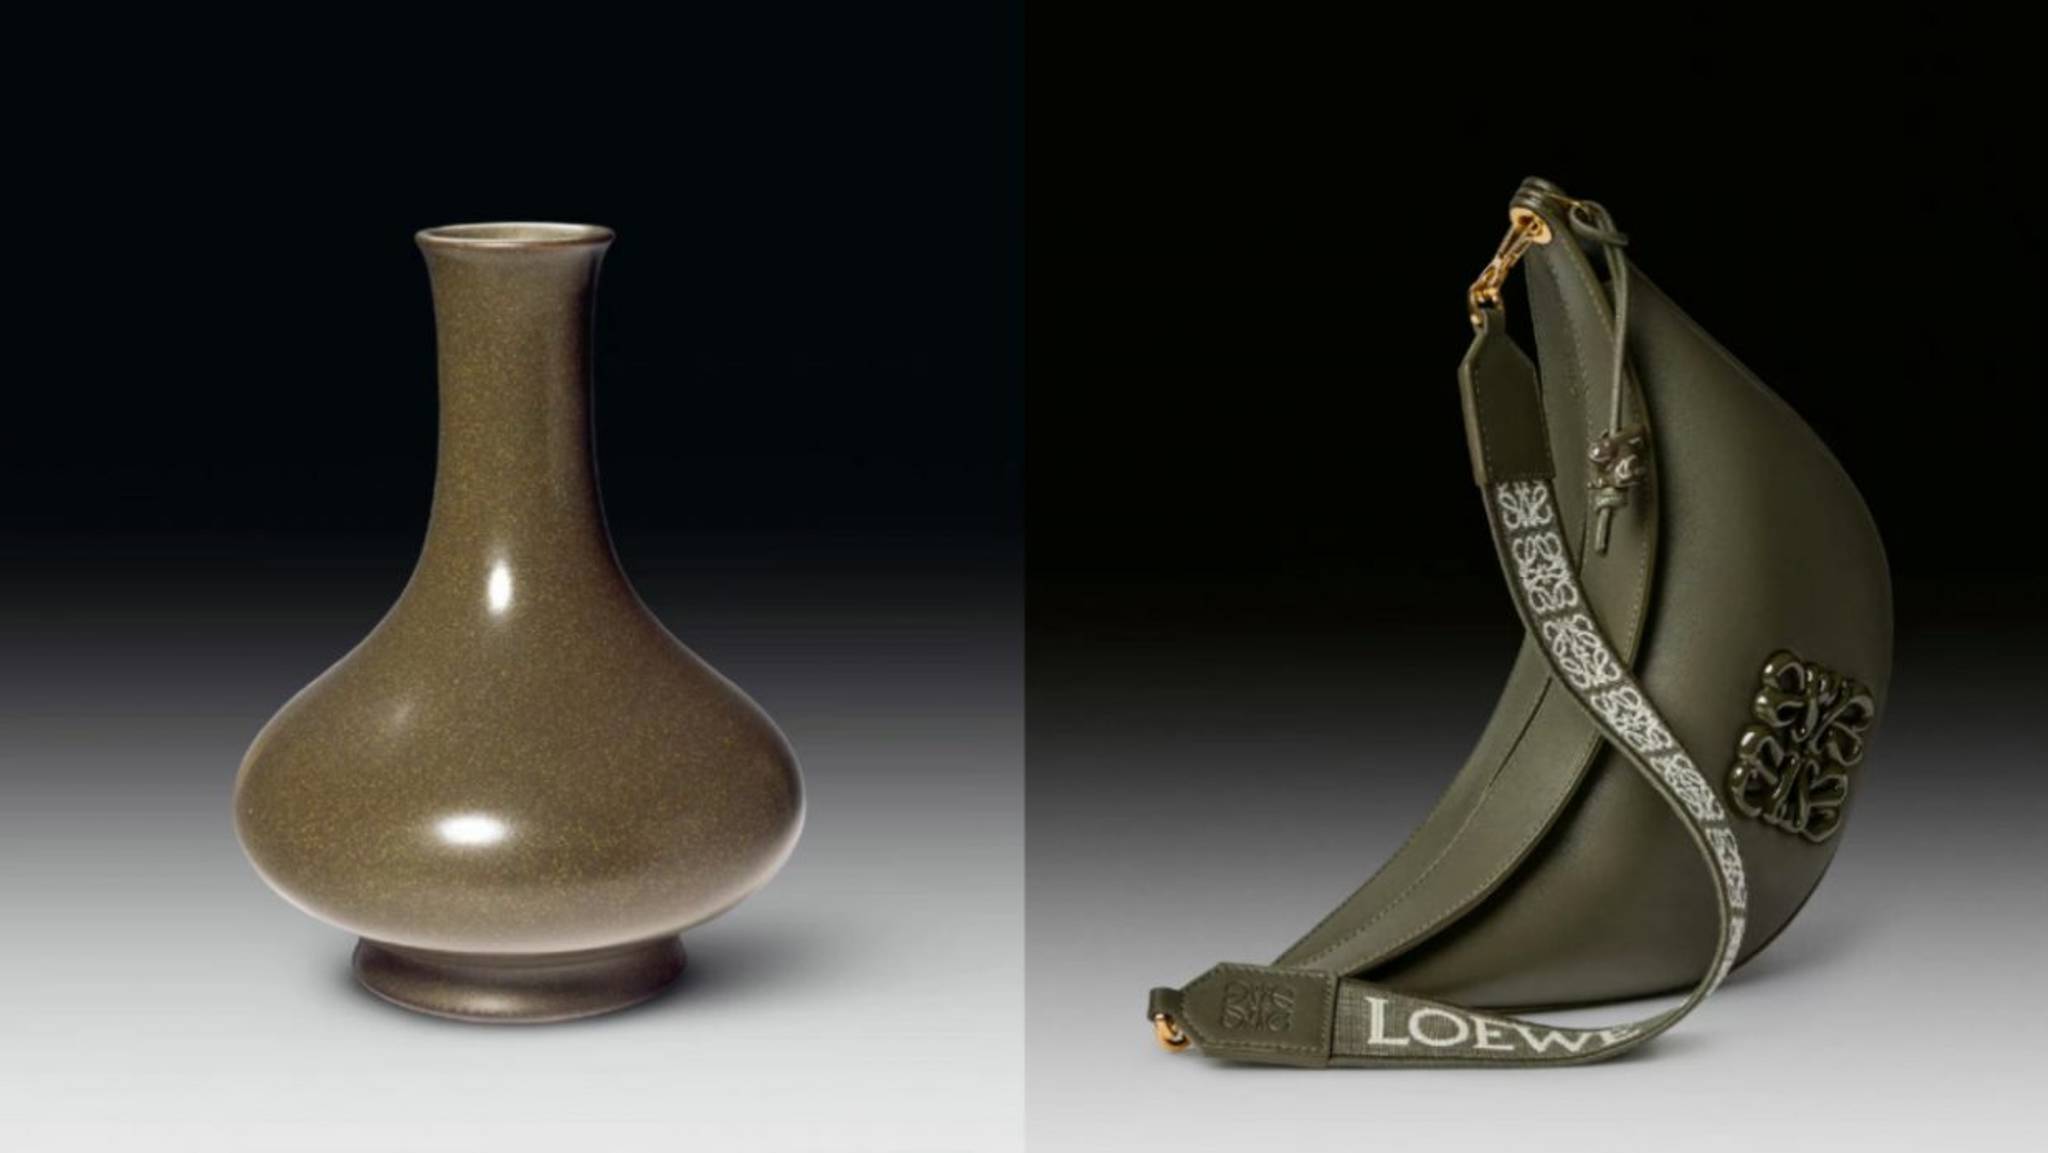 Loewe helps preserve Chinese culture with sponsorship